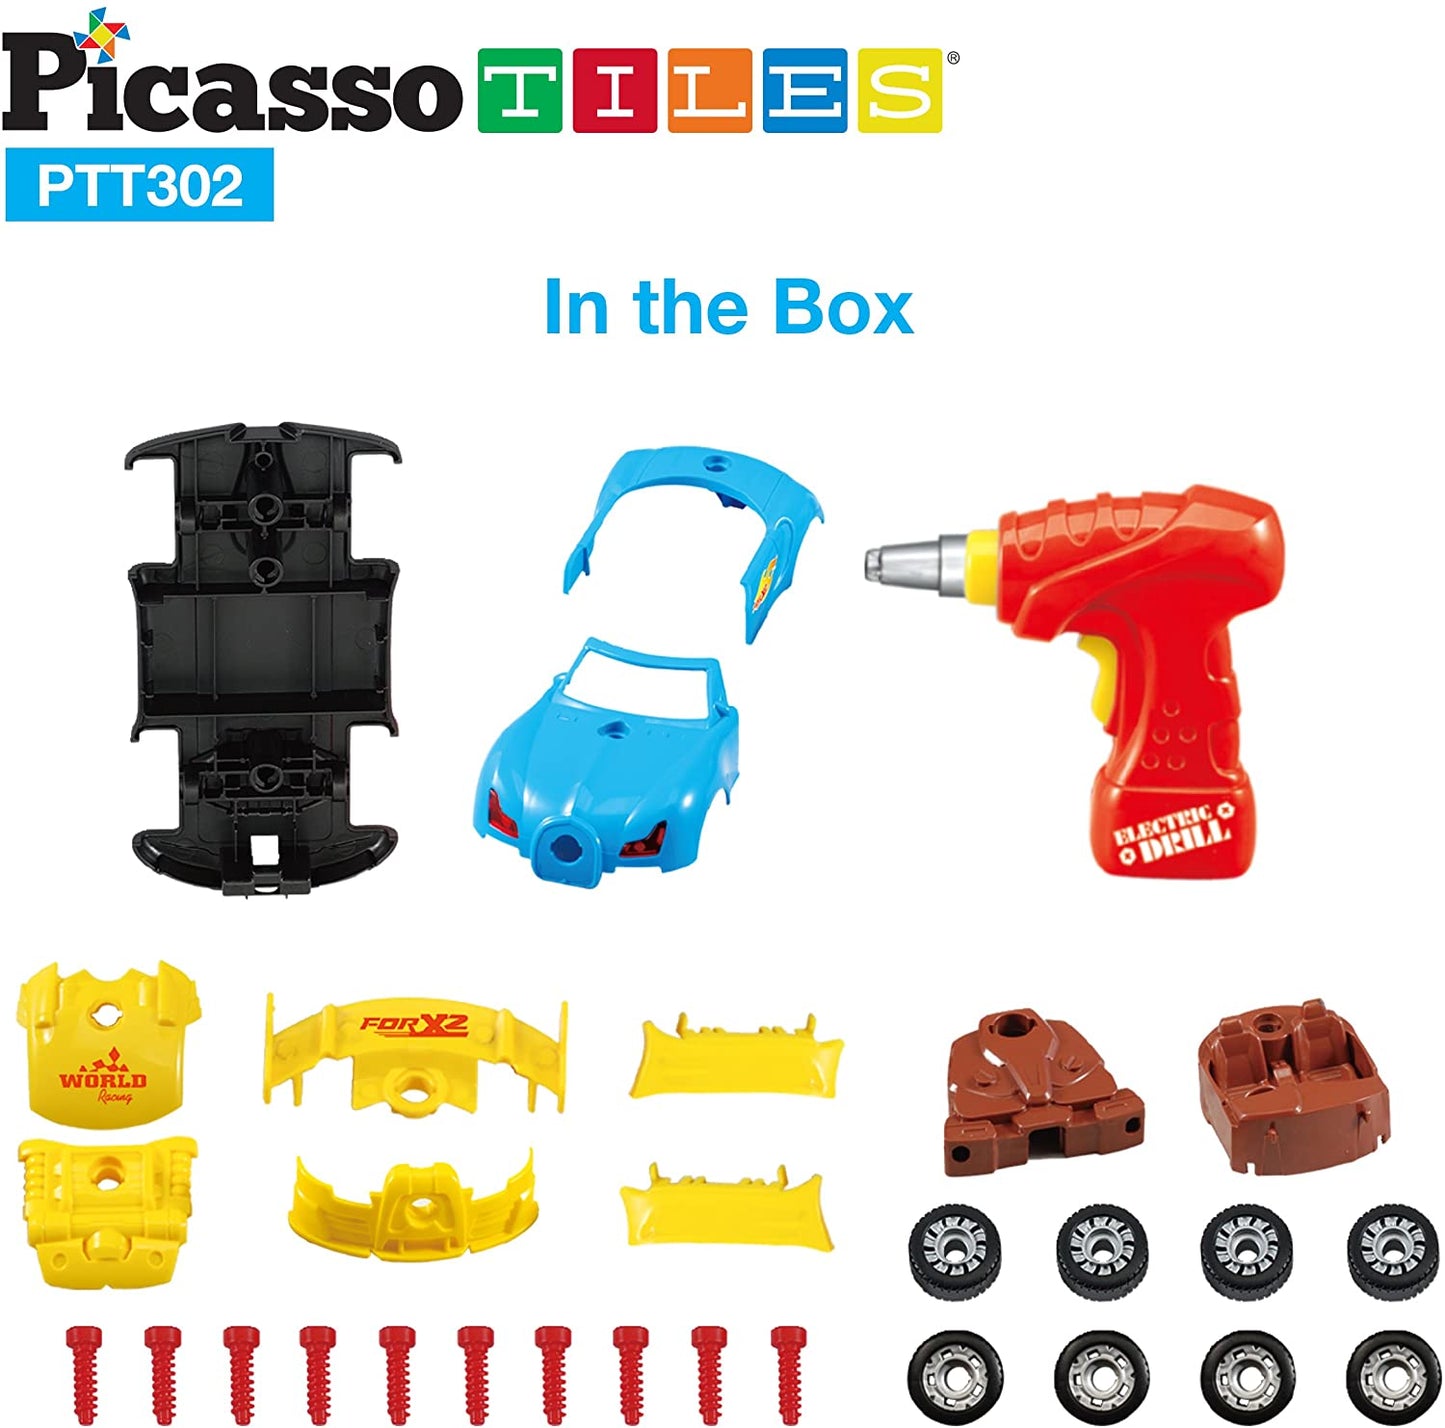 PicassoTiles Take-A-Part Race Car Set with LED, Engine Sound, Mini Electric Power Tool Reversible Drill, Screws Included PTT302